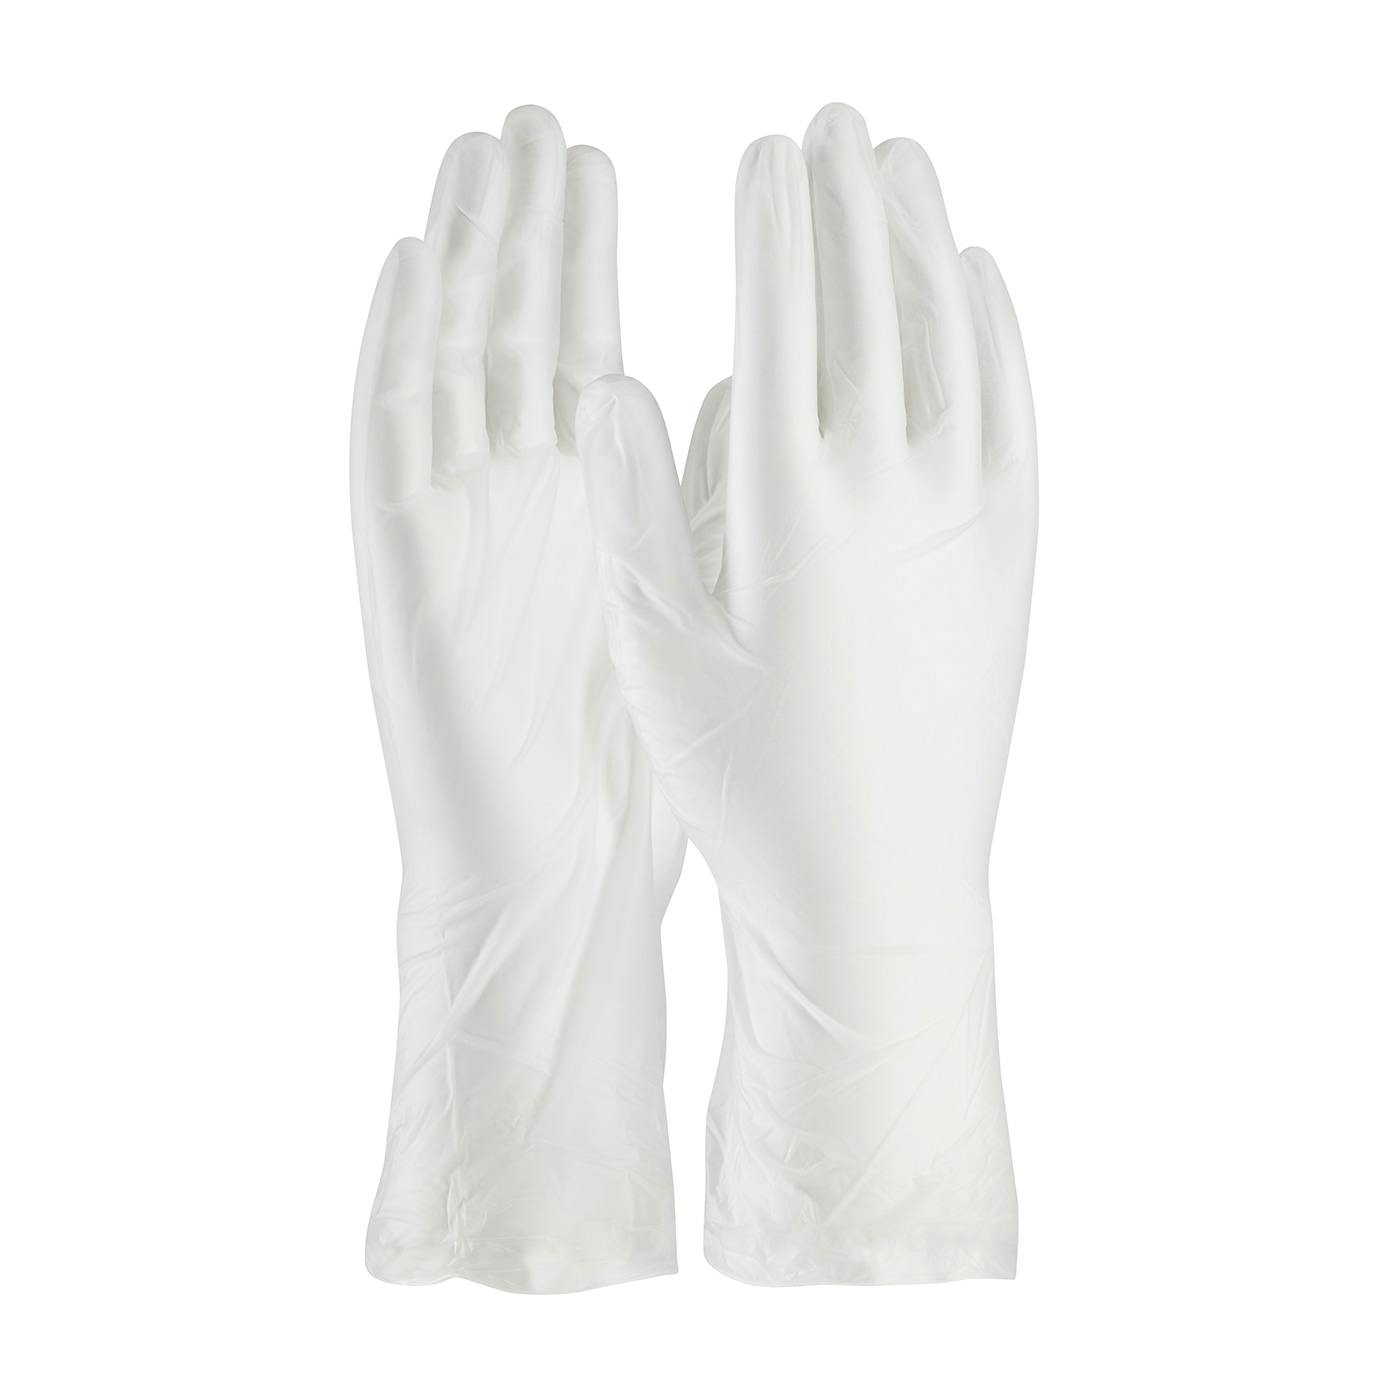 CleanTeam® Single Use Class 100 Cleanroom Vinyl Glove with Finger Textured Grip - 12" (100-2830)_0